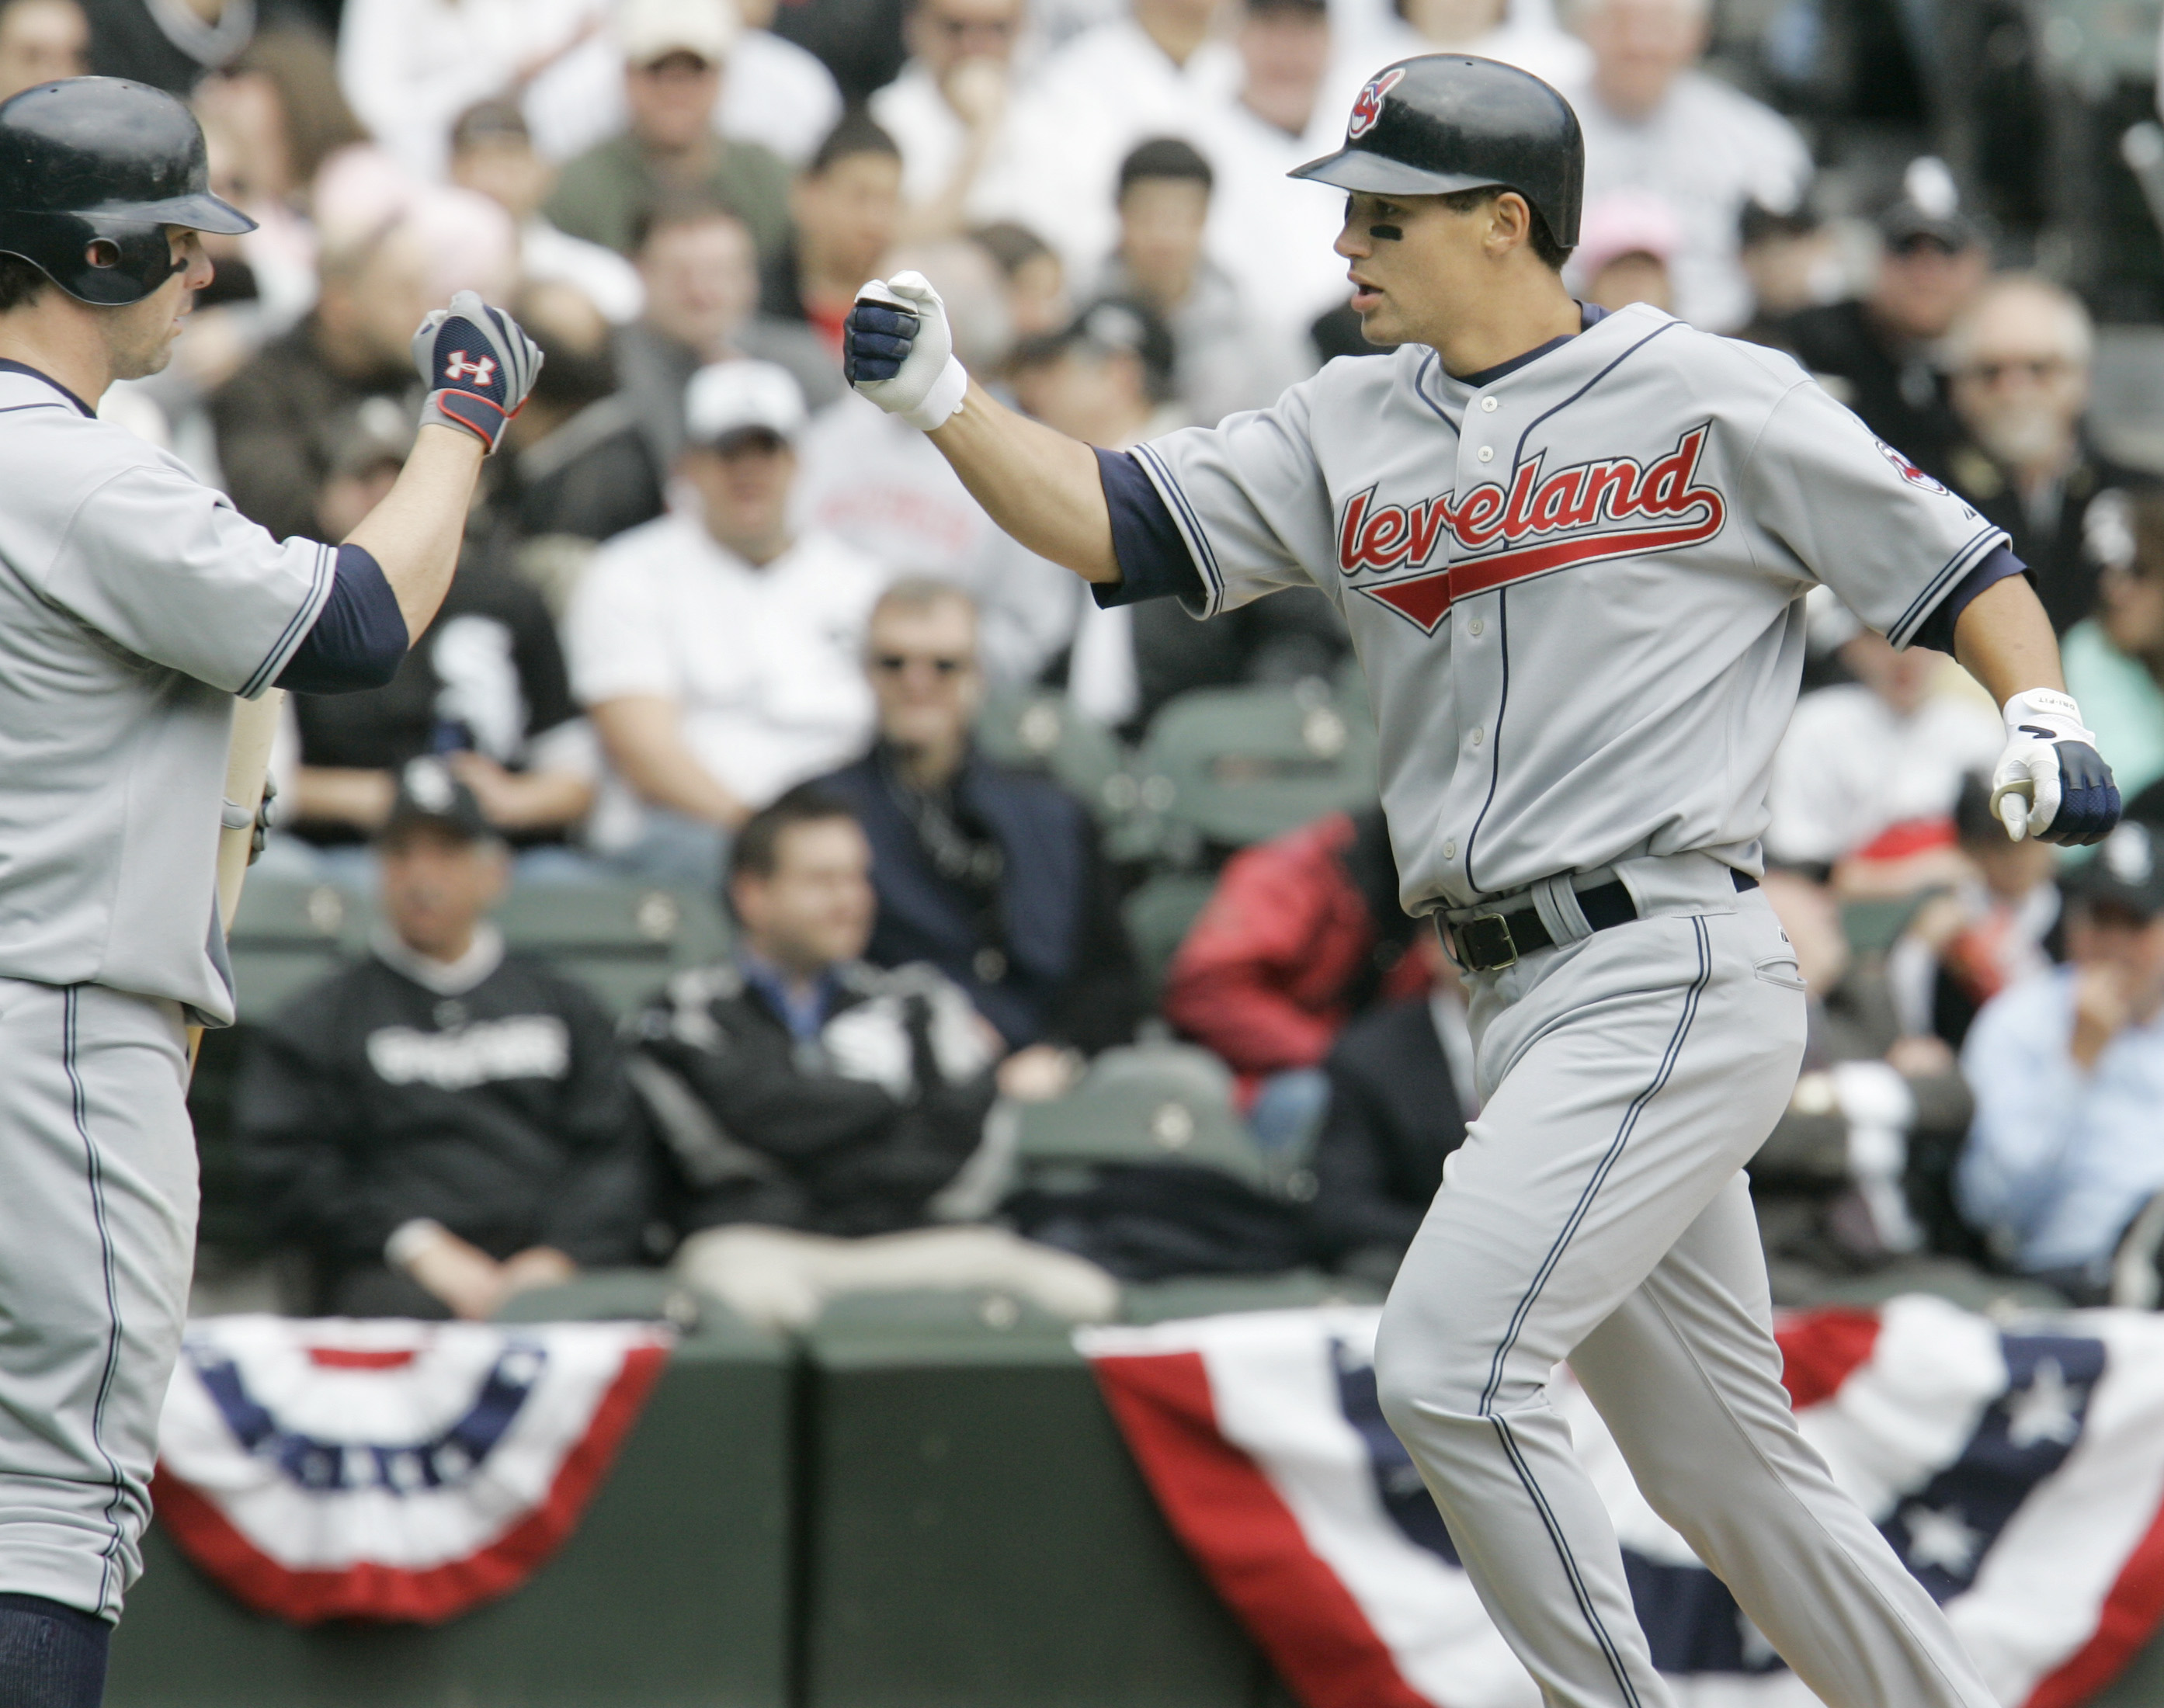 Grady Sizemore opens up a lead: On this day in Cleveland Indians